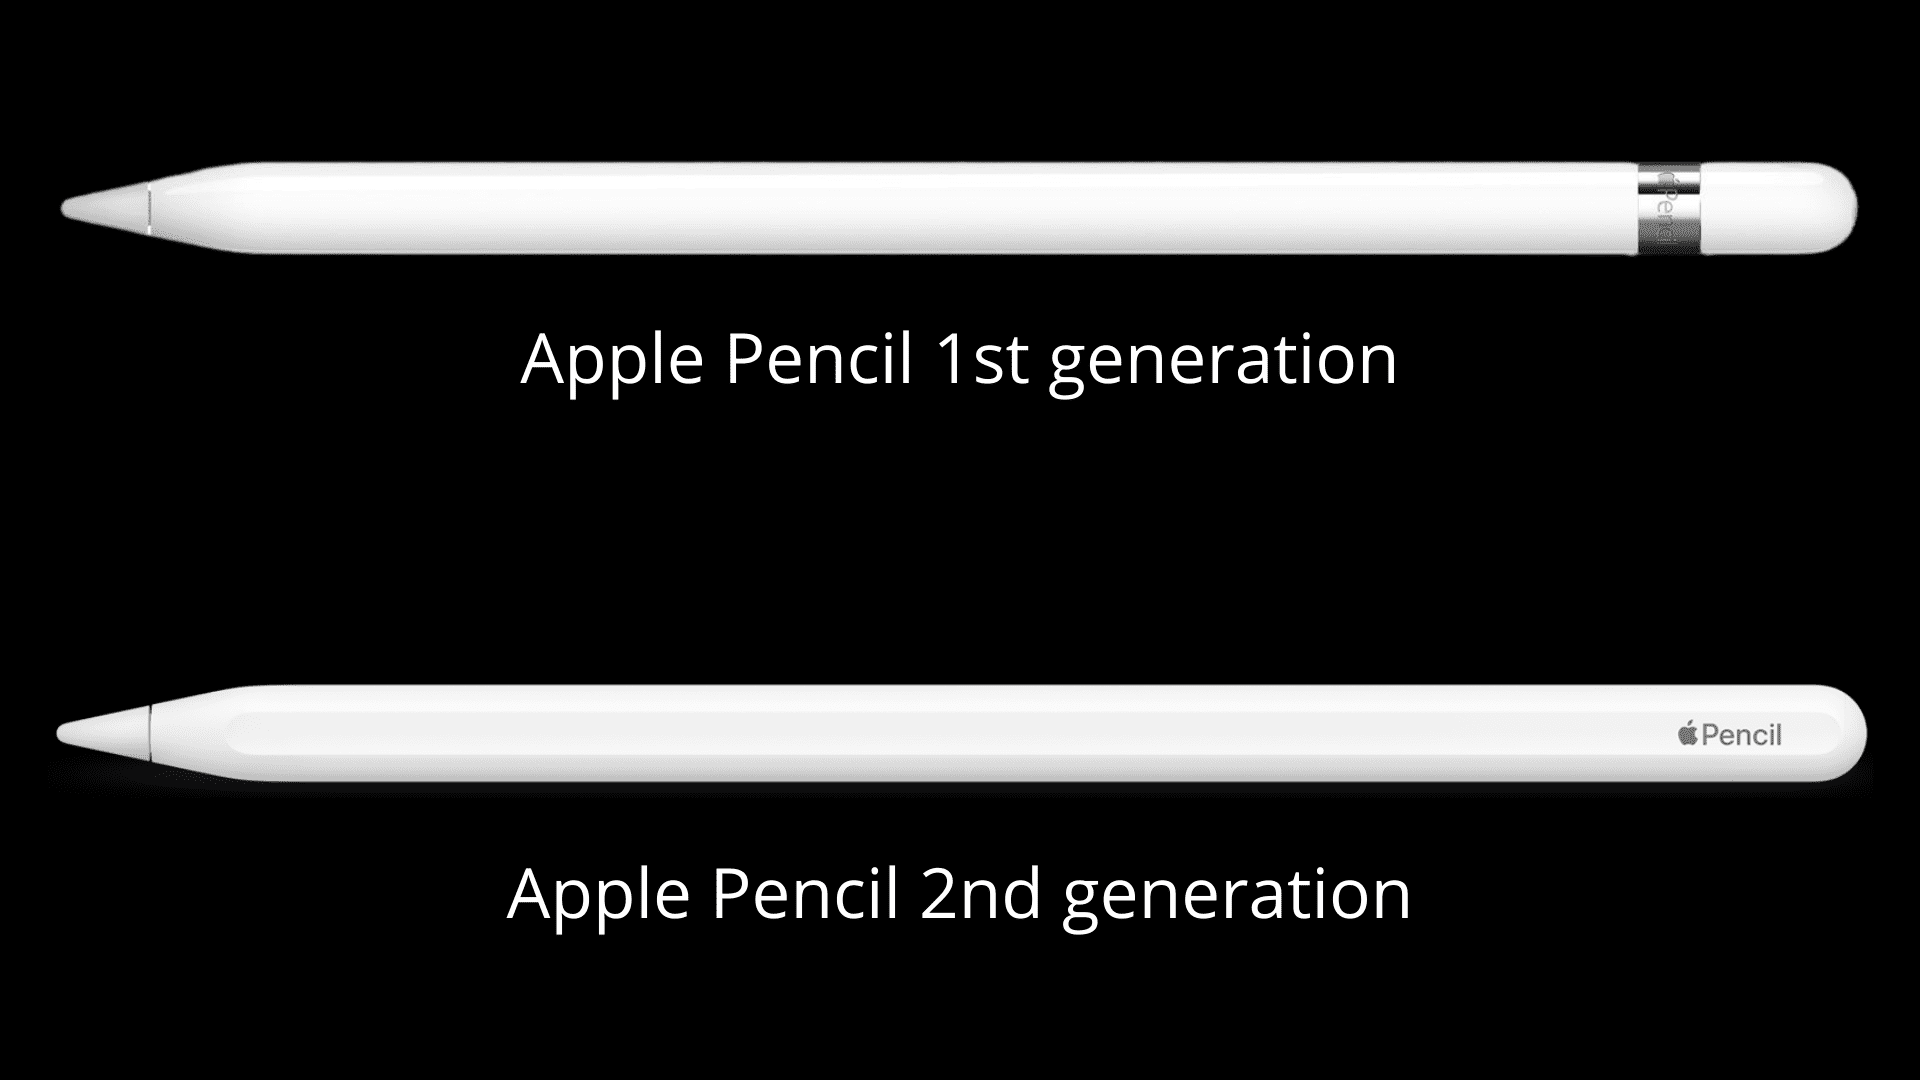 Apple Pencil 1st and 2nd generation